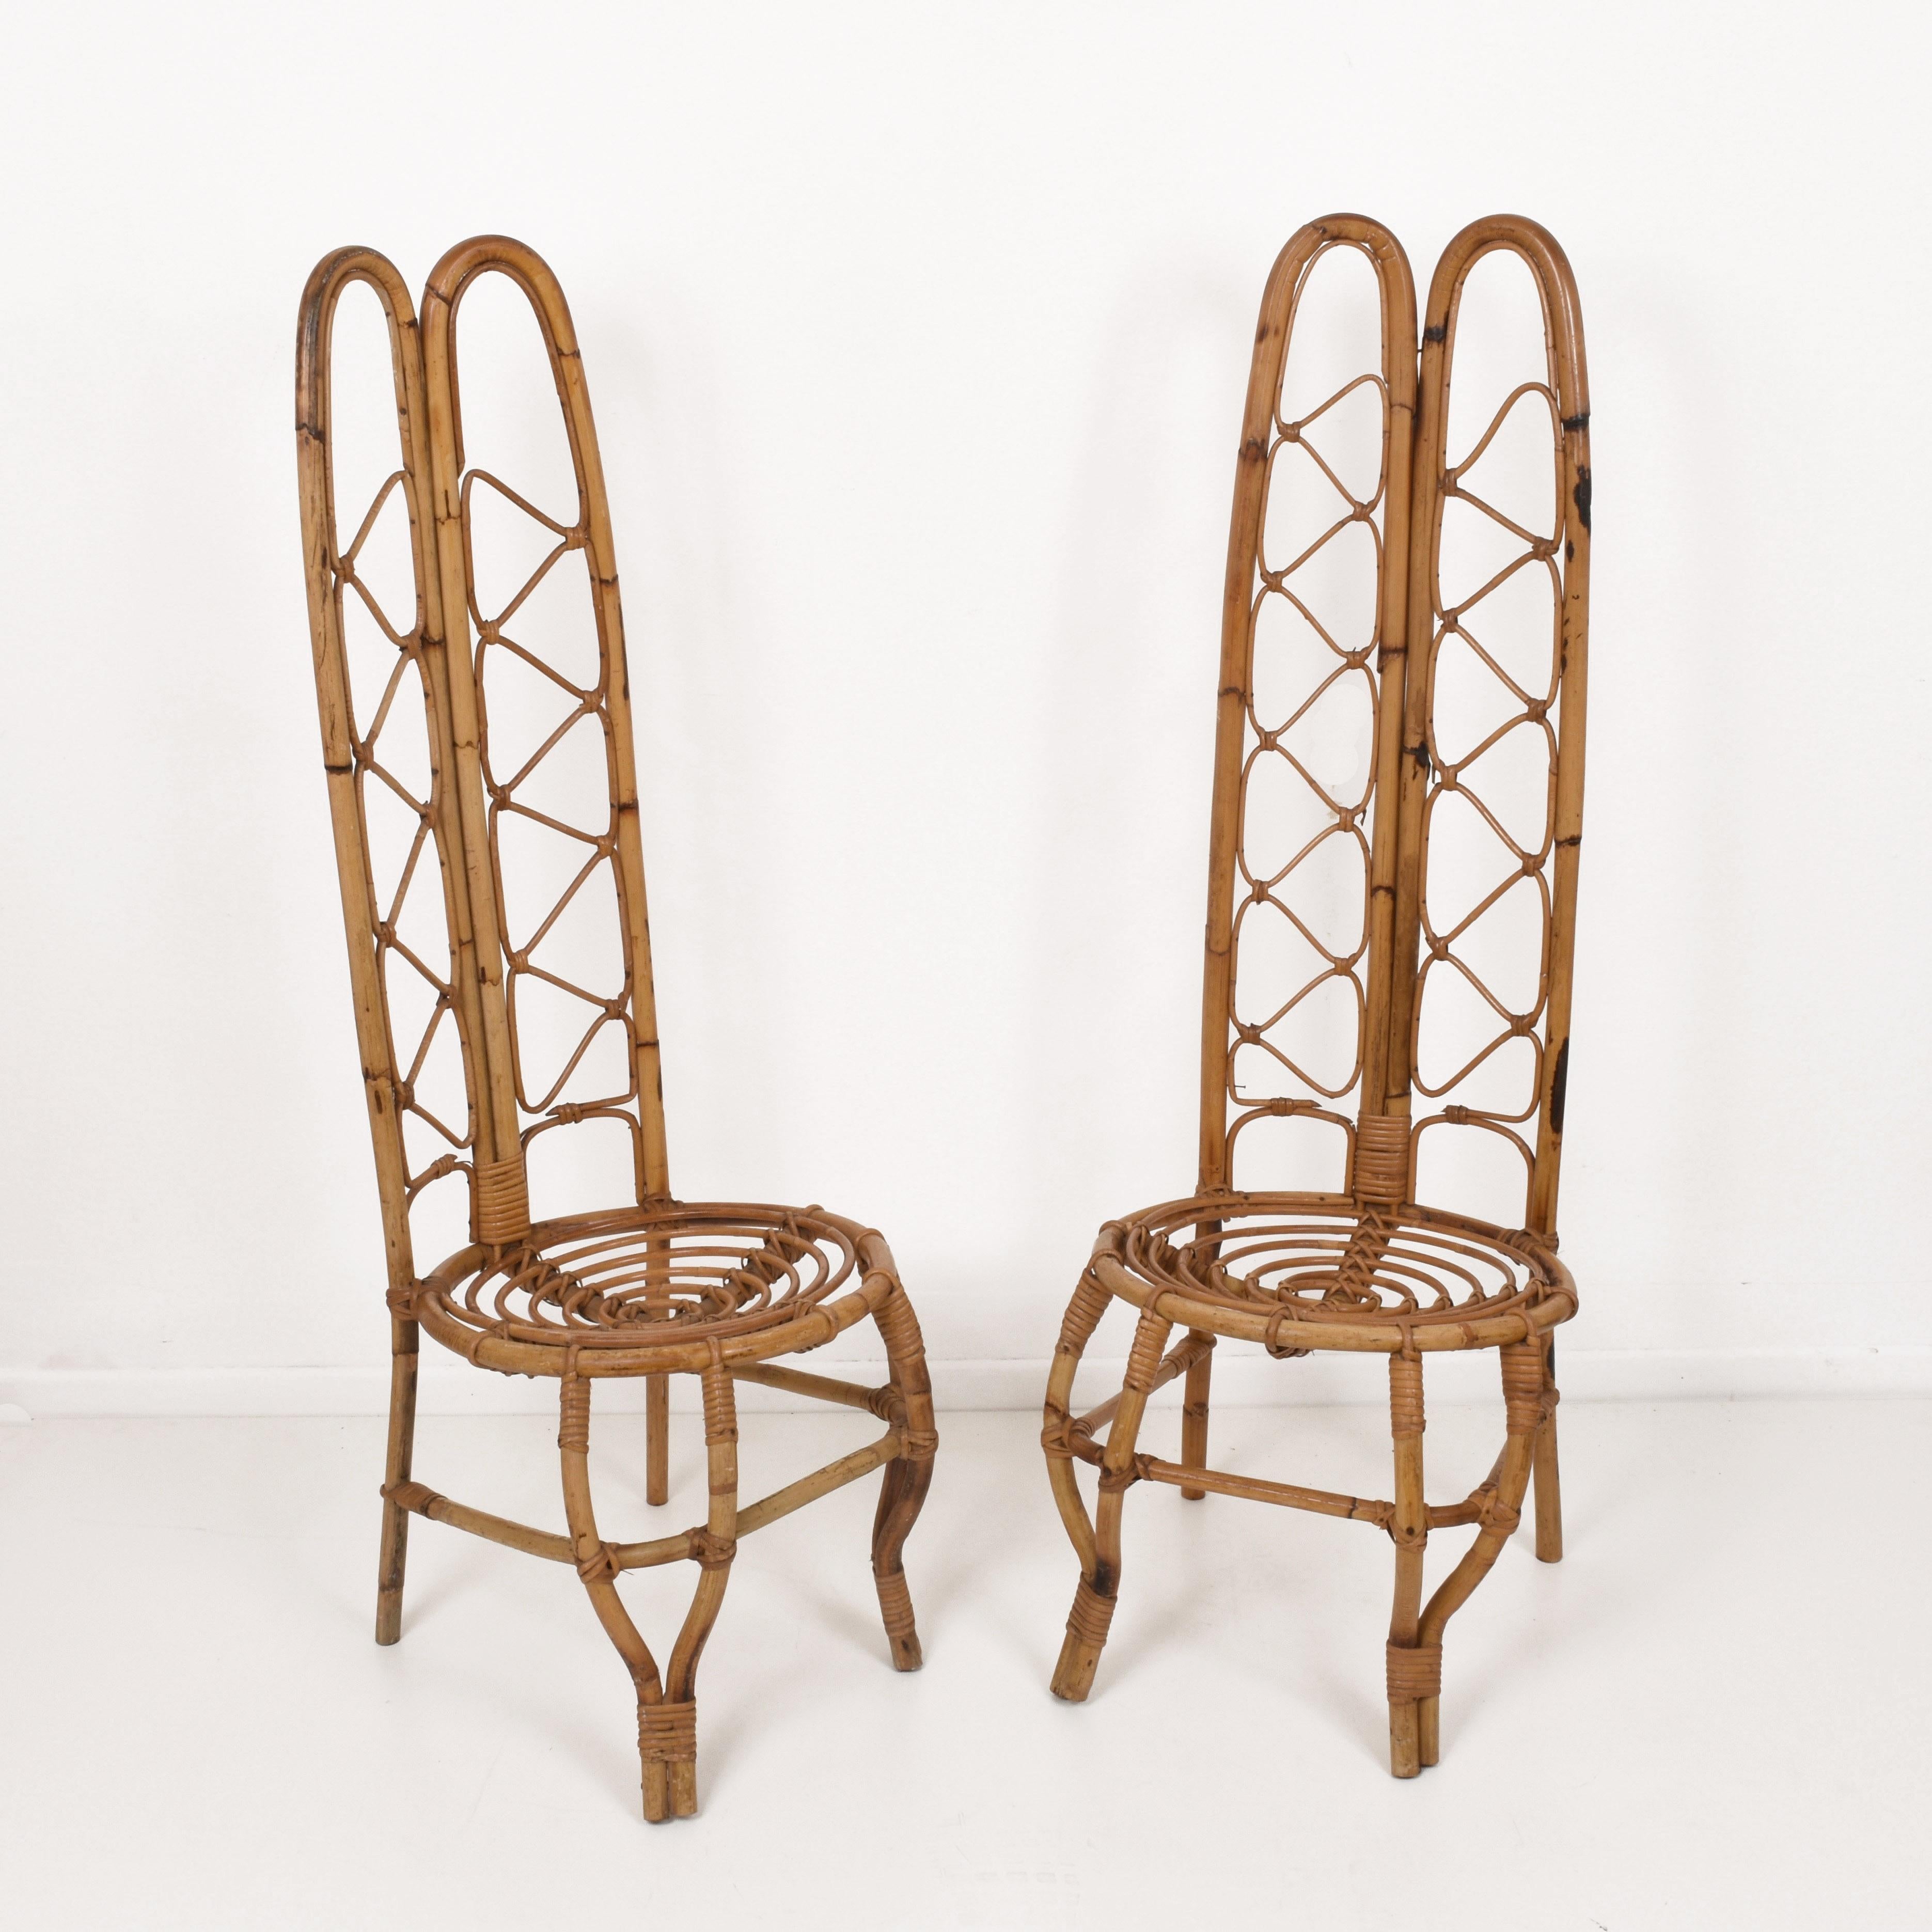 Wonderful pair of midcentury French Riviera rattan and bamboo chairs. This marvellous set was produced in France during the 1960s.

They are unique as they have a very high back seat made of mixed rattan and bamboo.

This amazing chair will give